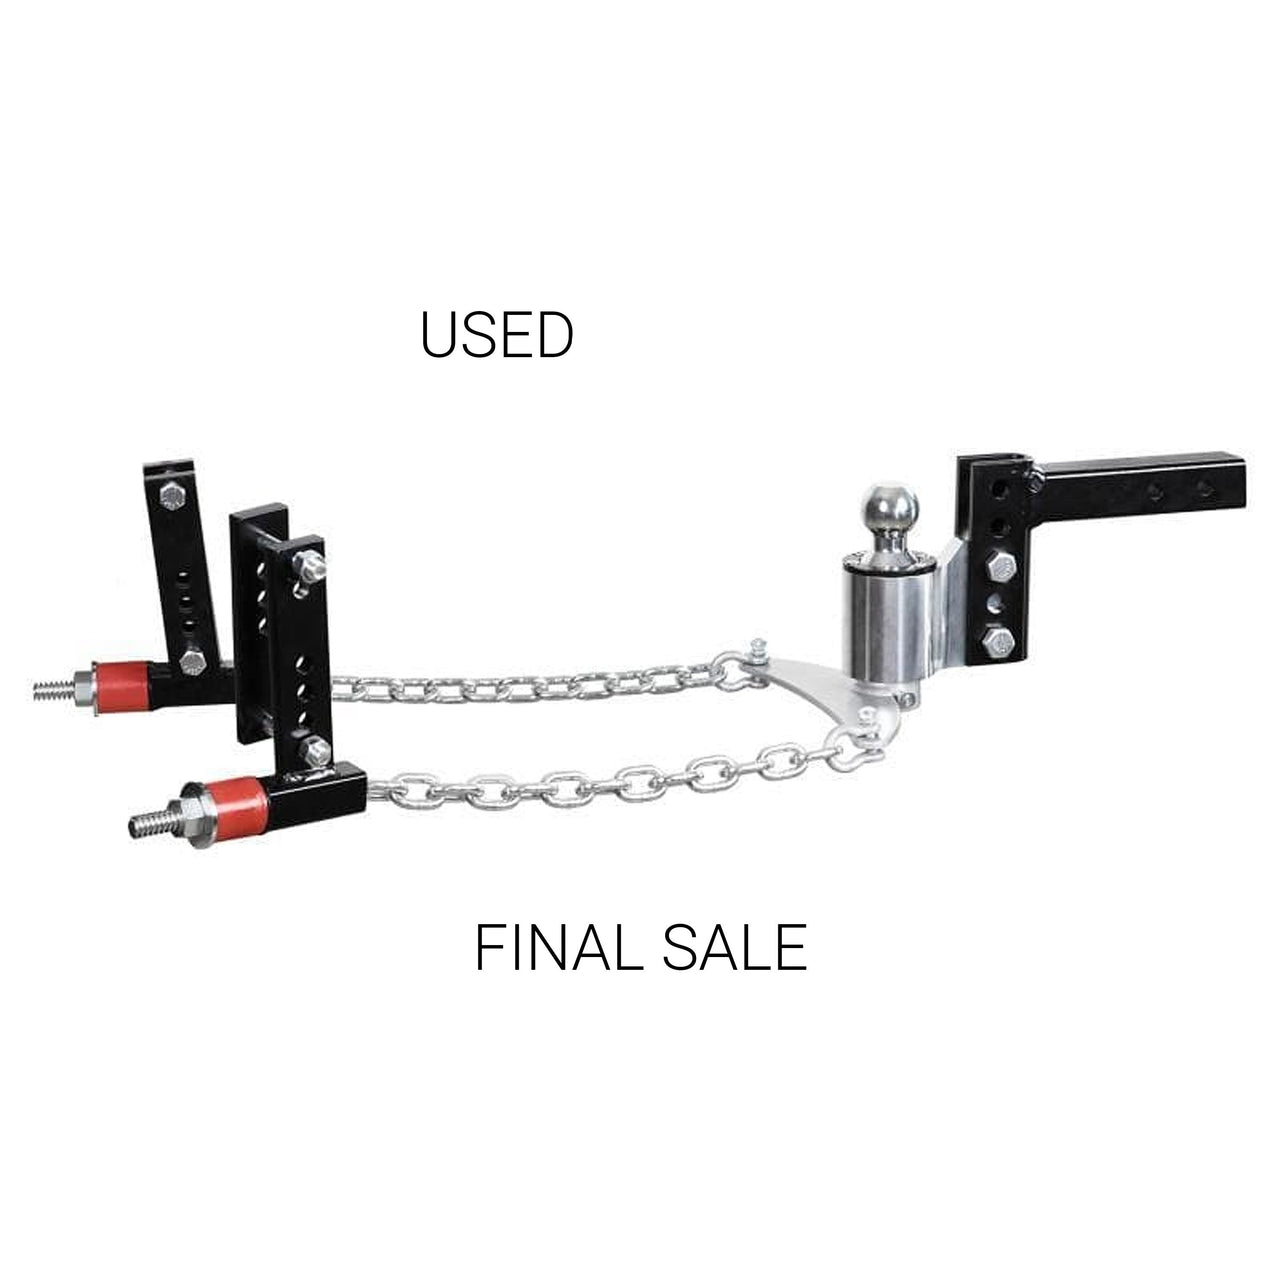 USED/Final Sale - 8" drop/rise, 2" ball, 3", 4", 5" & 6" brackets - No-Sway Weight Distribution Hitch